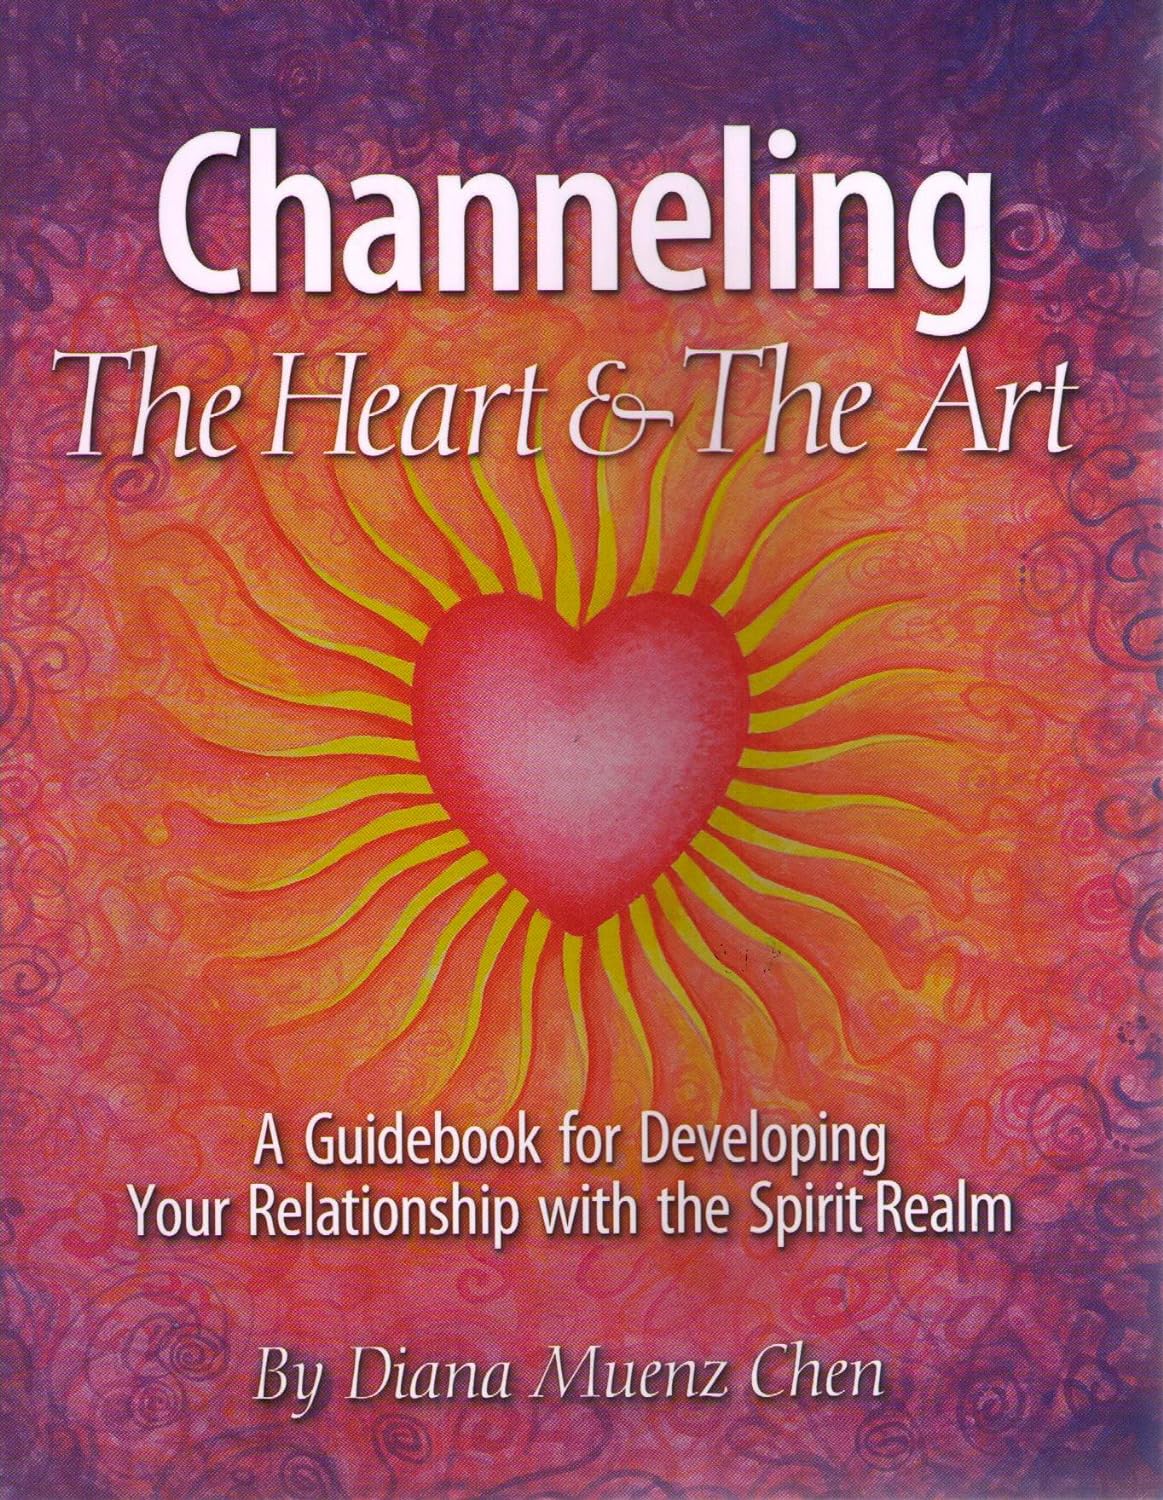 Channeling: The Heart & The Art